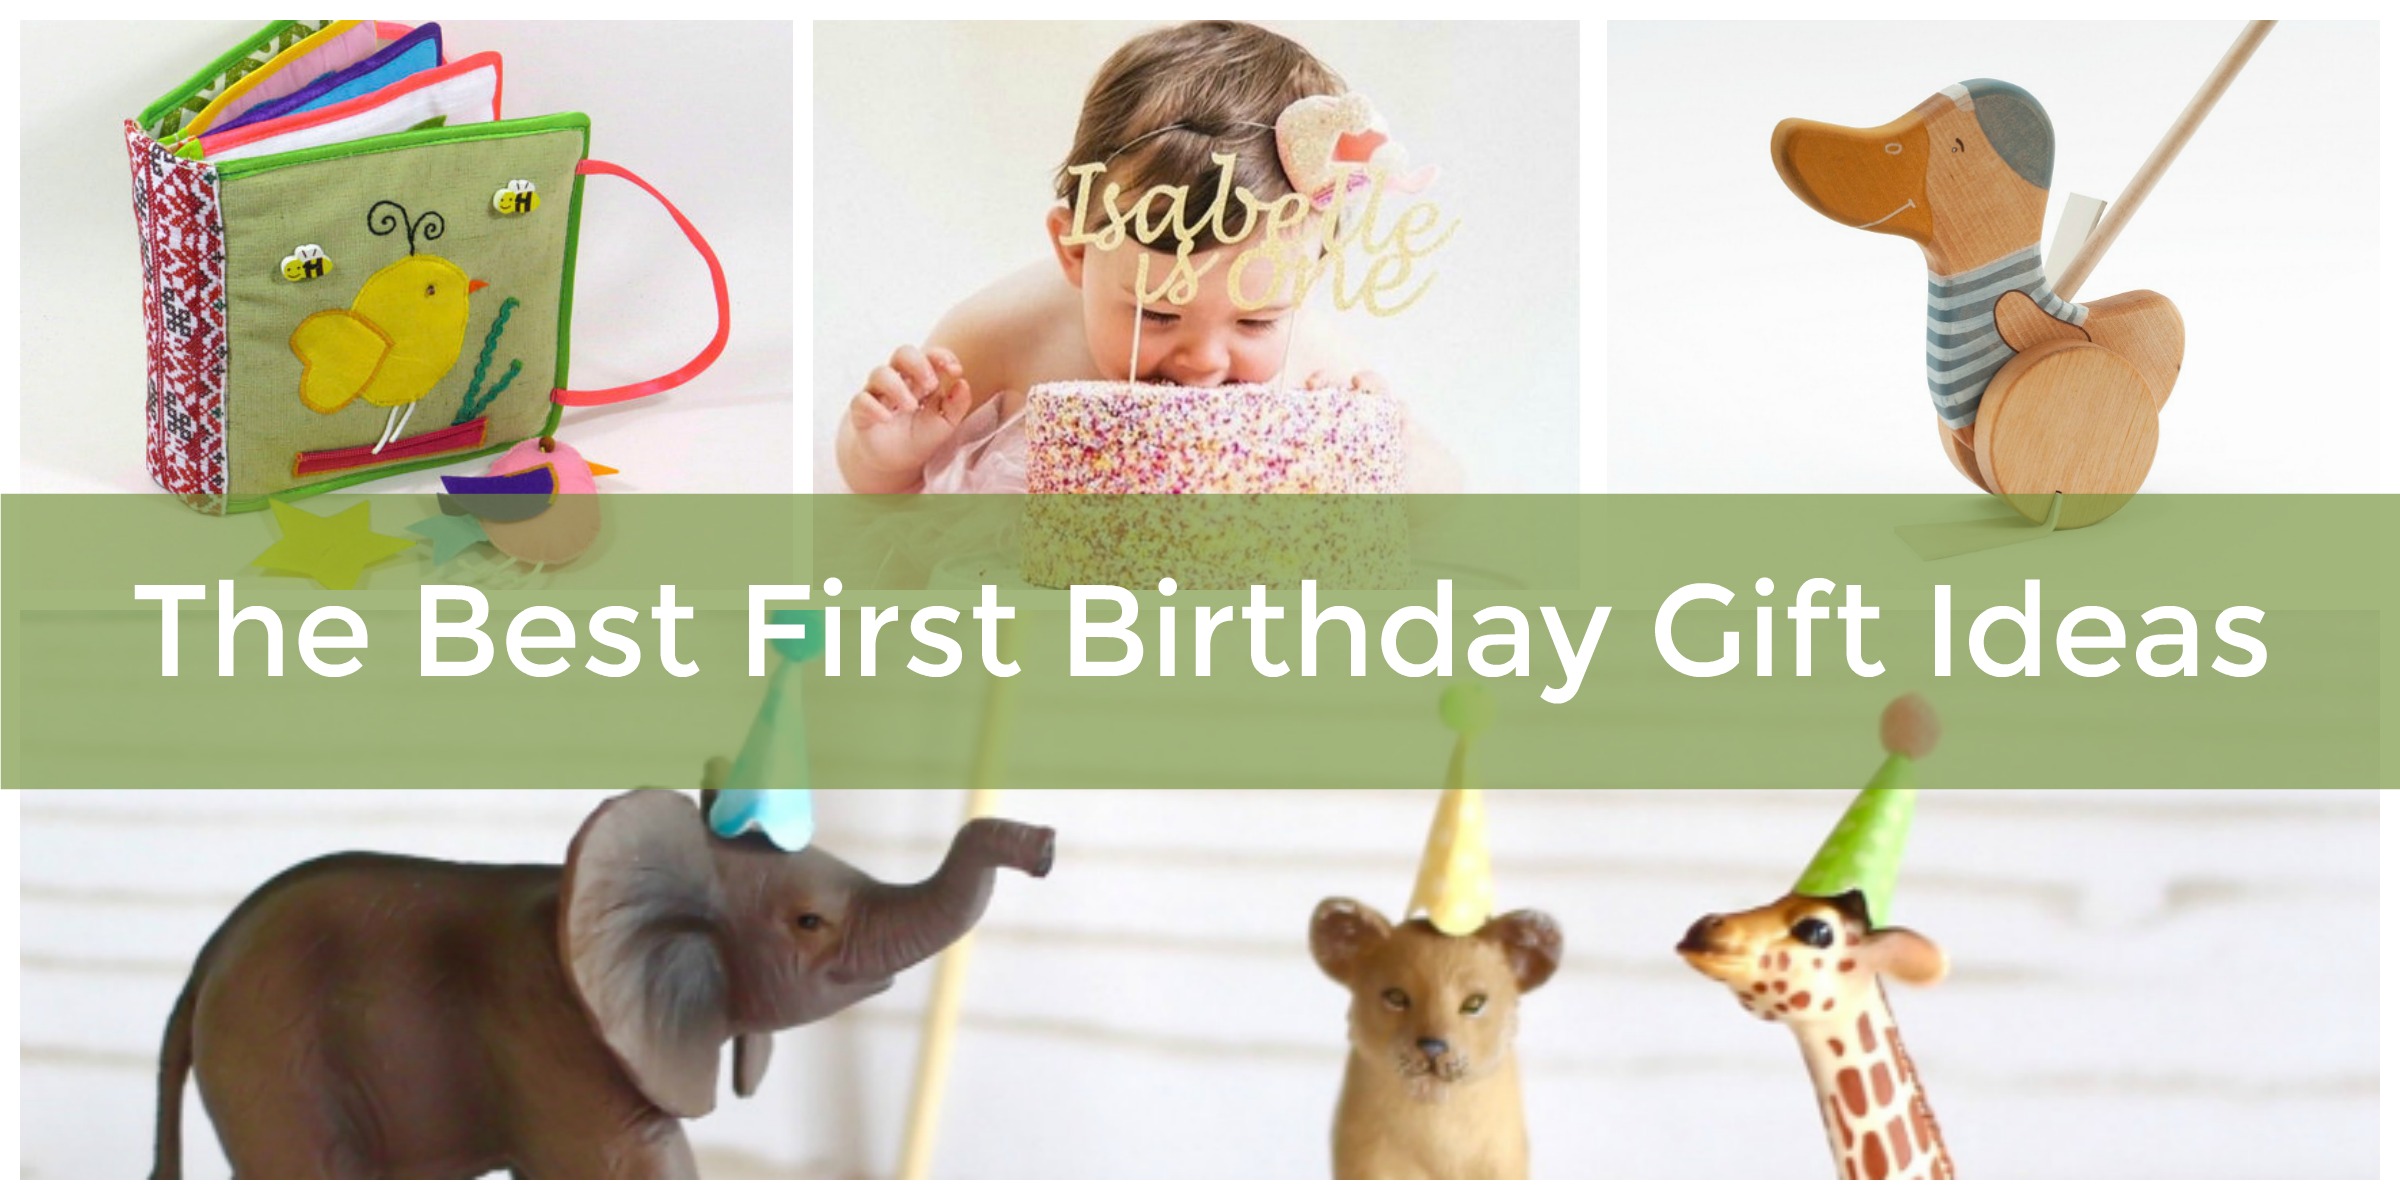 The Best First Birthday Gift Ideas to